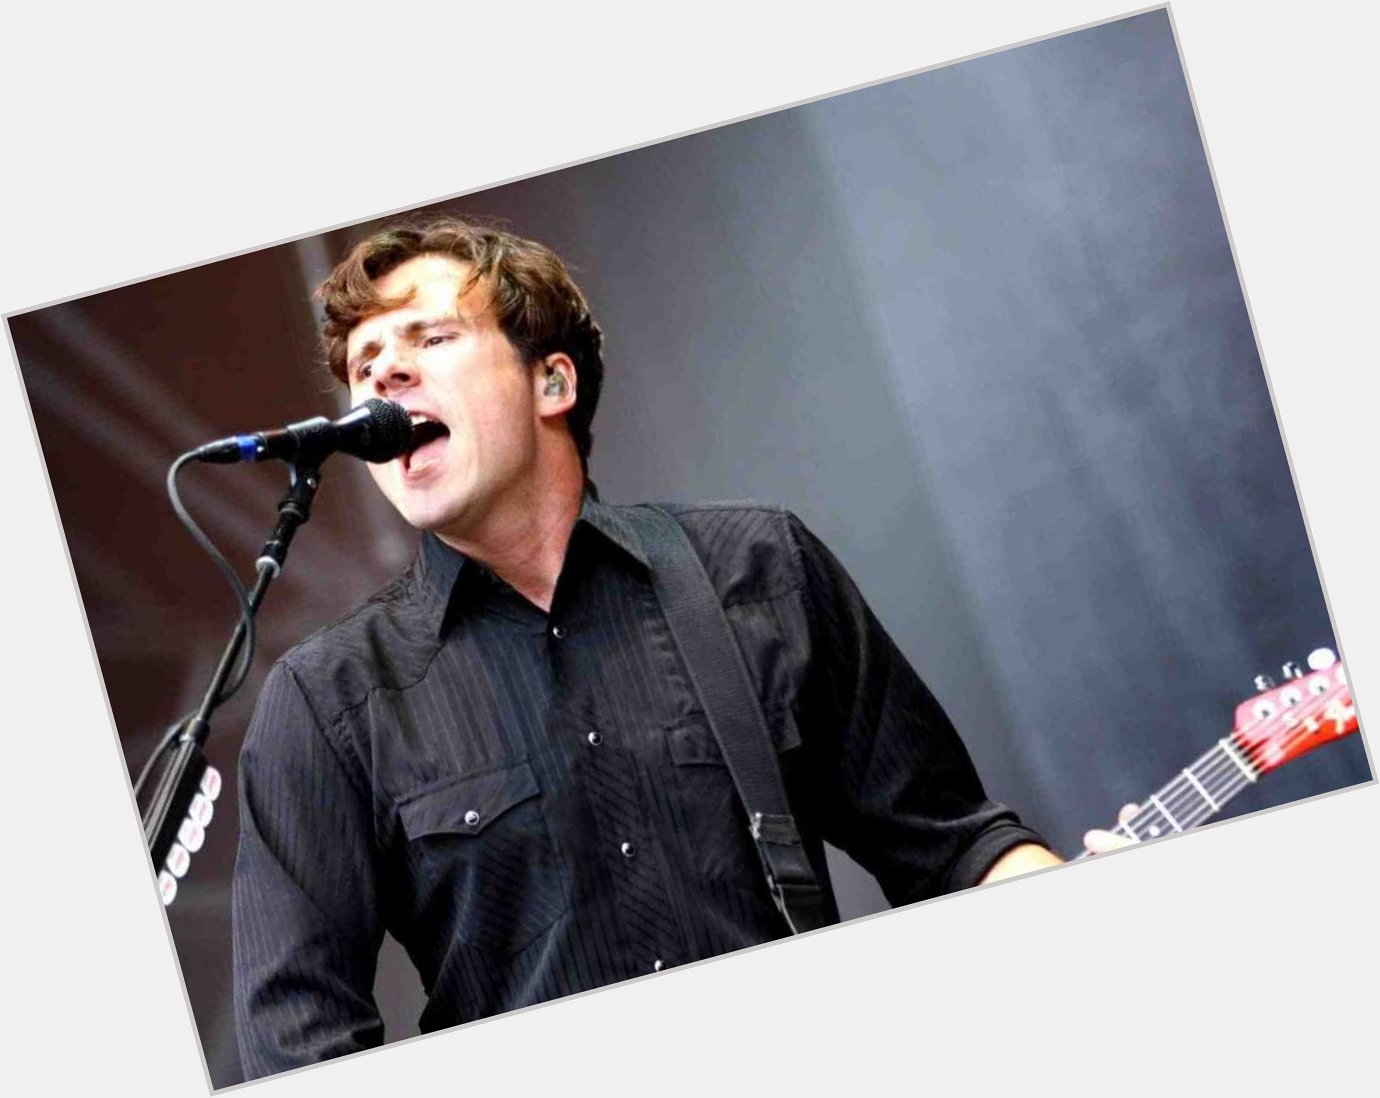 More happy birthday vibes today, this time to Jimmy Eat World frontman Jim Adkins! 